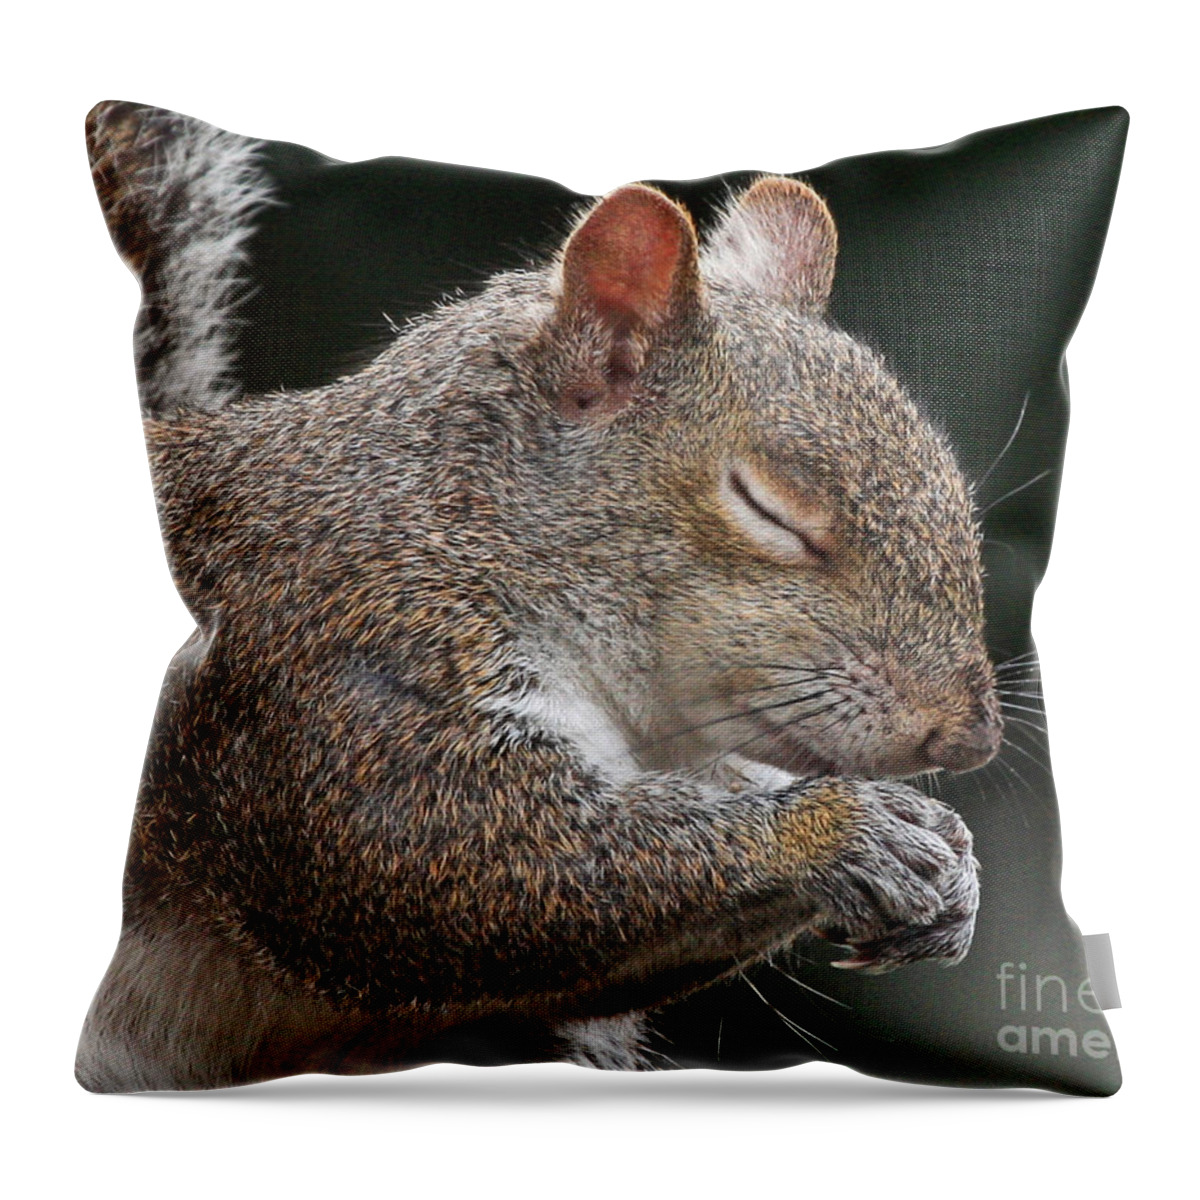 Squirrel Throw Pillow featuring the photograph Squirrel Giving Thanks by Luana K Perez